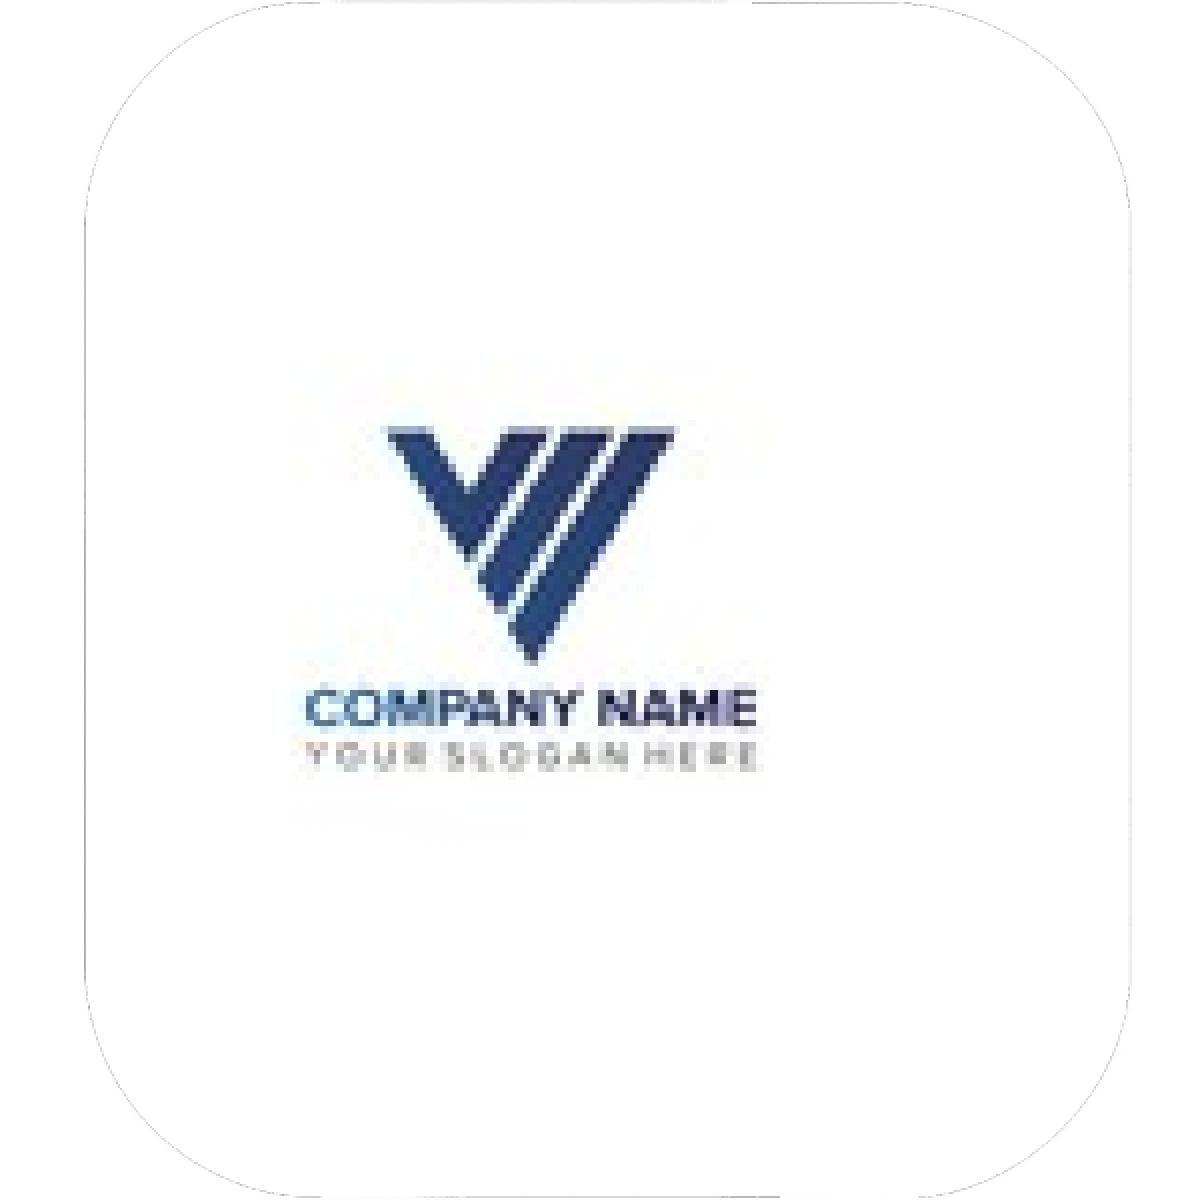 Vl Initial Logo Company Name Colored Stock Vector (Royalty Free) 680785282